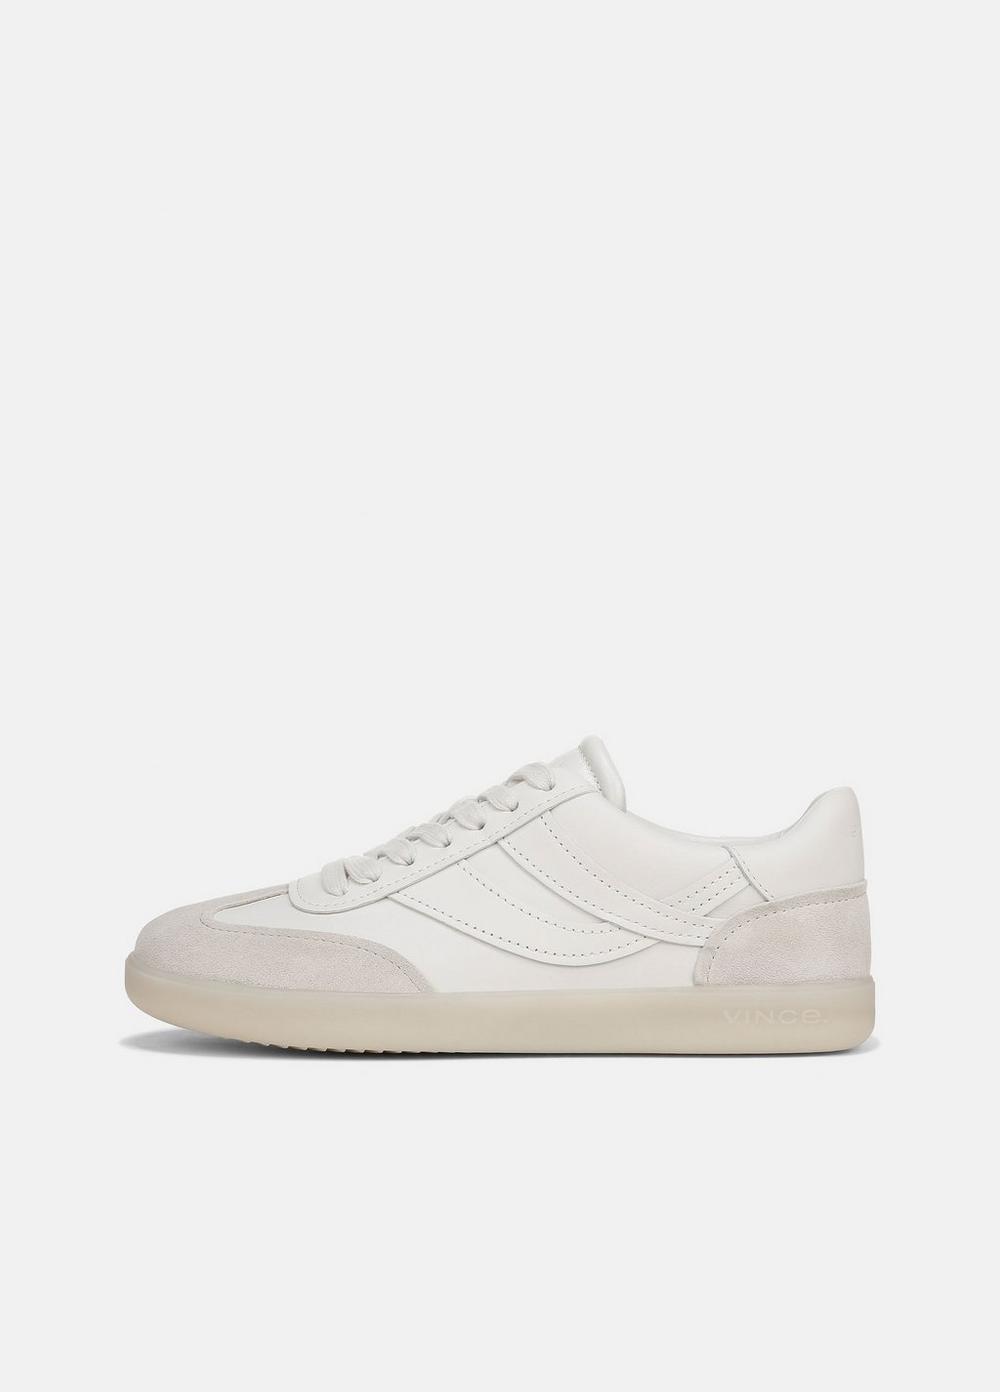 Oasis Leather And Suede Sneaker, Chalk White, Size 9.5 Vince